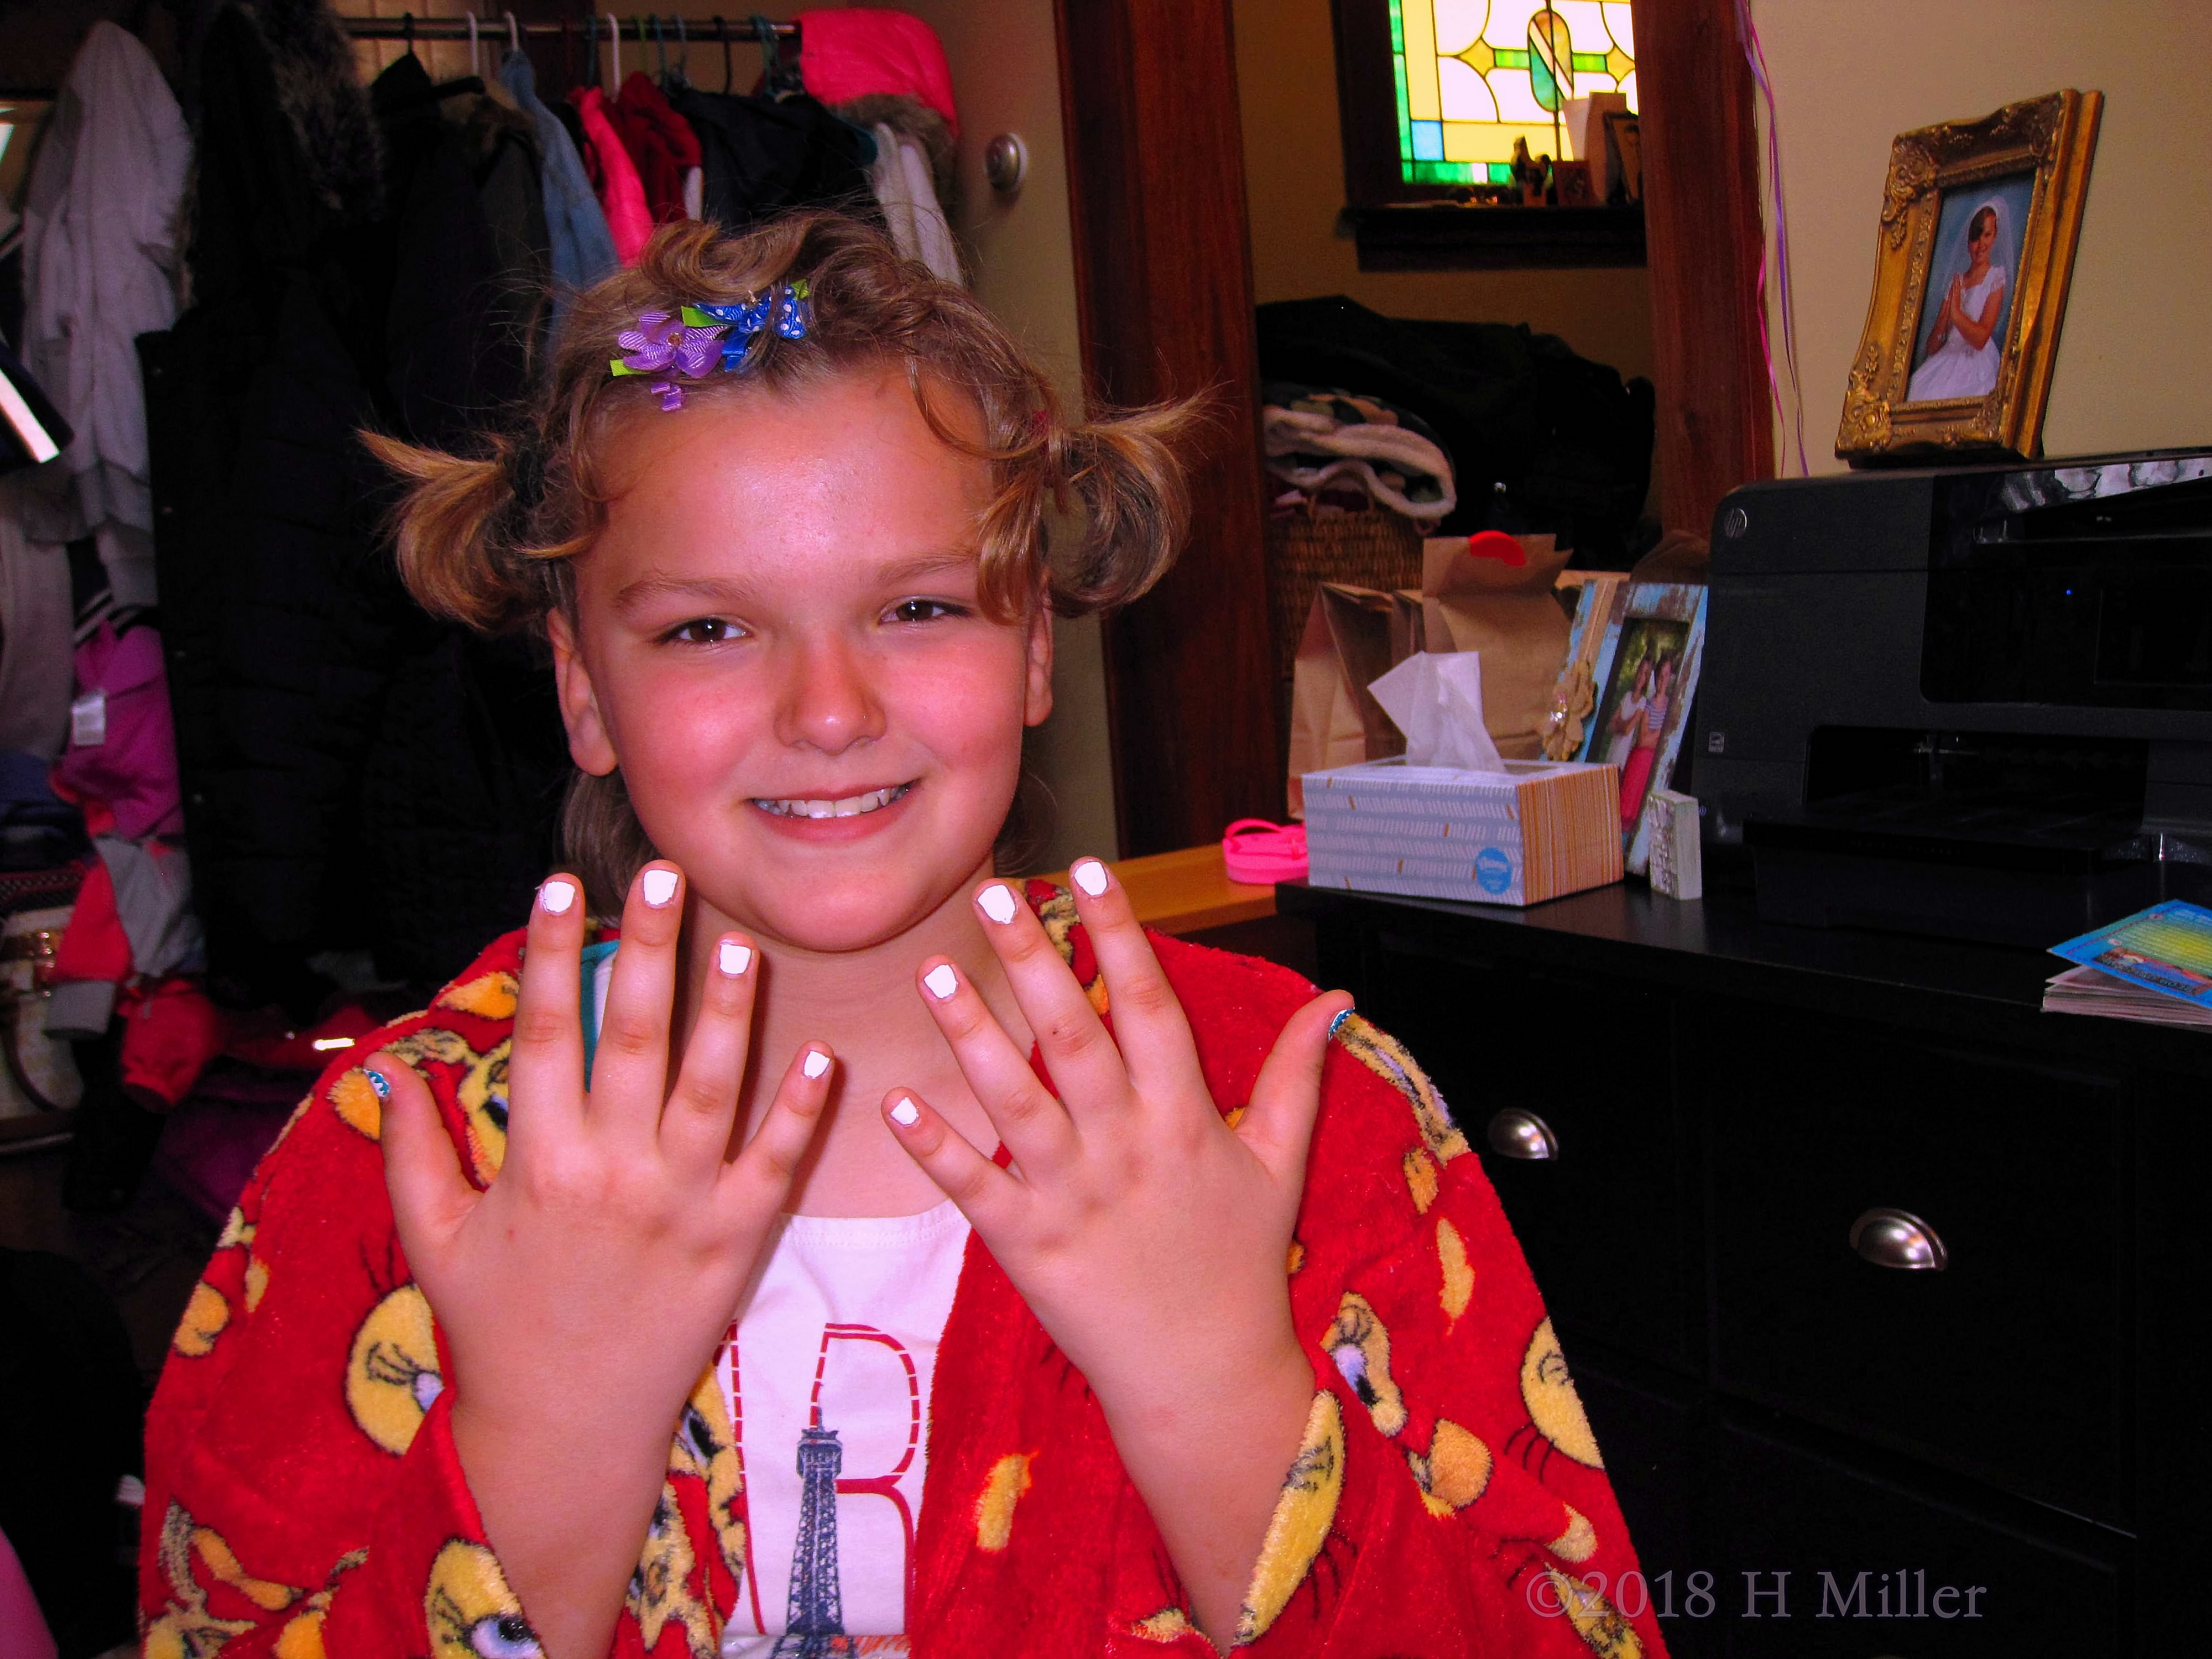 White Manicure For Kids Gives The Birthday Girl A Big Smile 4